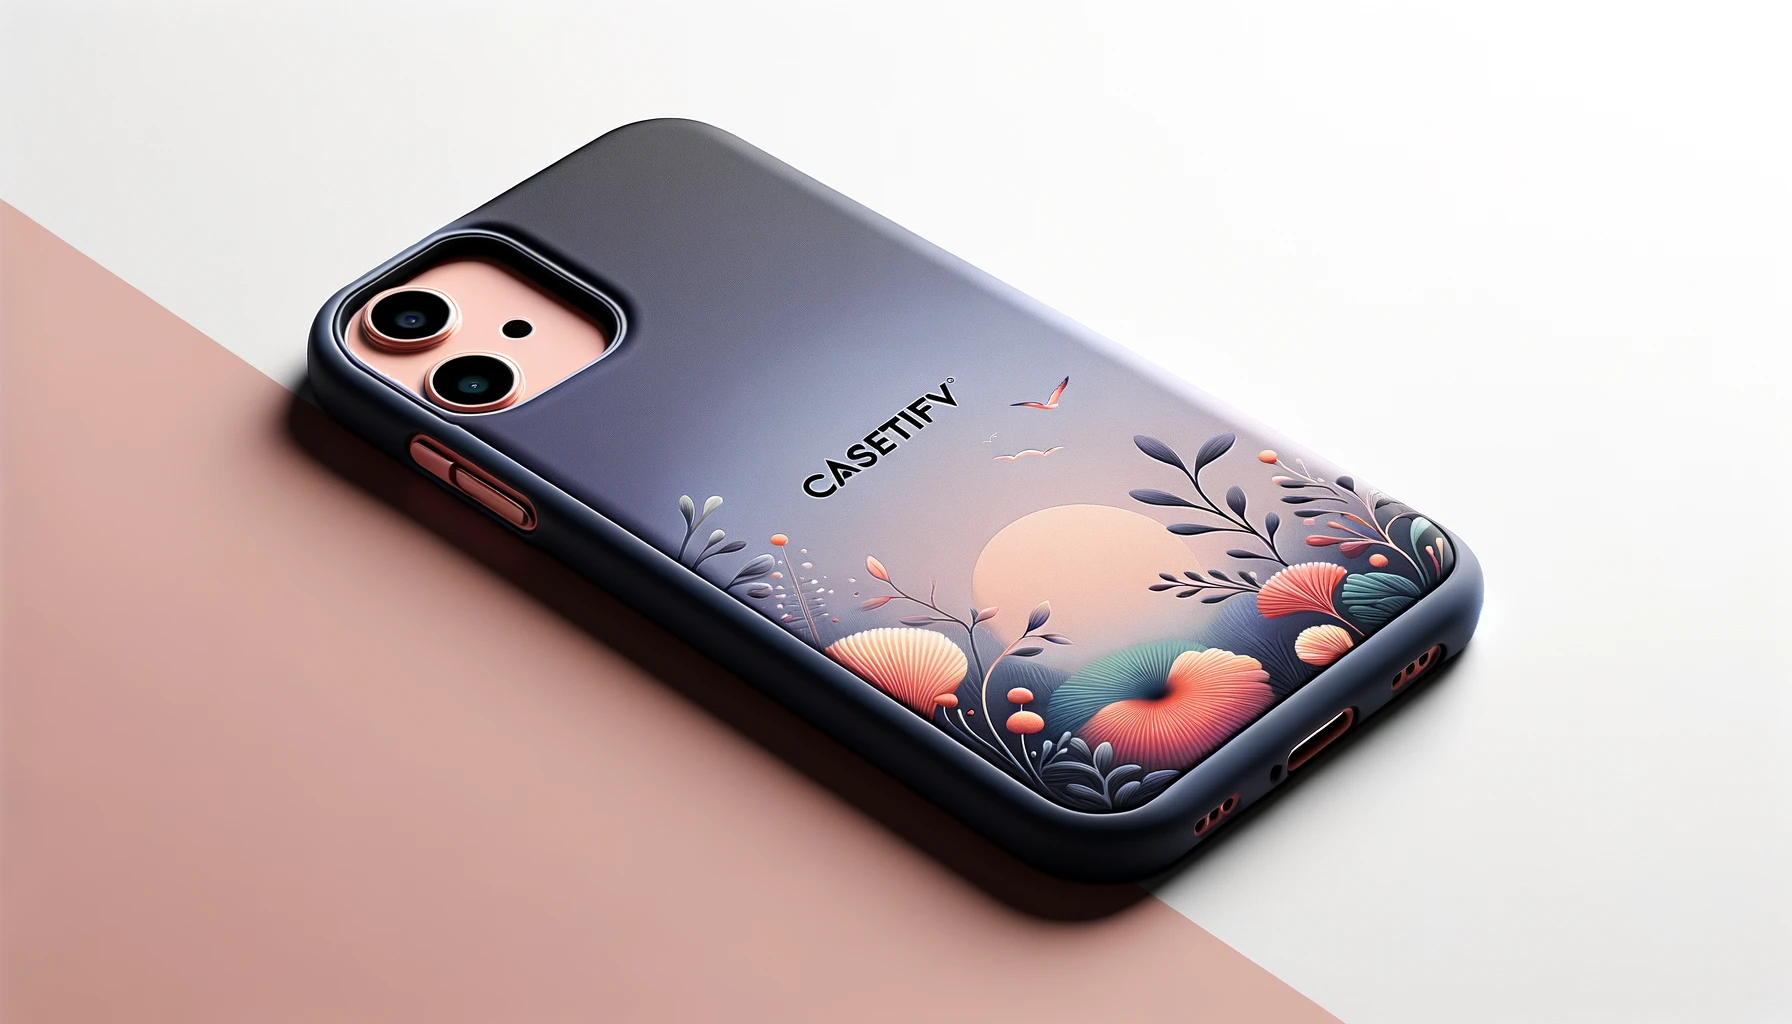 A detailed image of a single CASETiFY phone case, showcasing its design, materials, and features. The phone case should be presented in a stylish and modern way with the word 'CASETiFY' clearly visible.